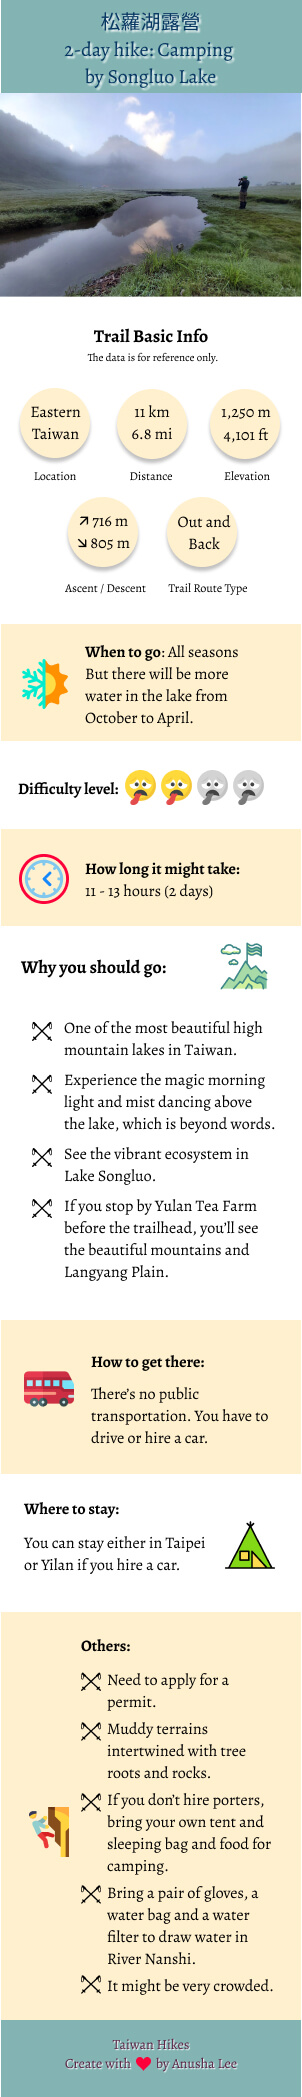 Songluo Lake infographic